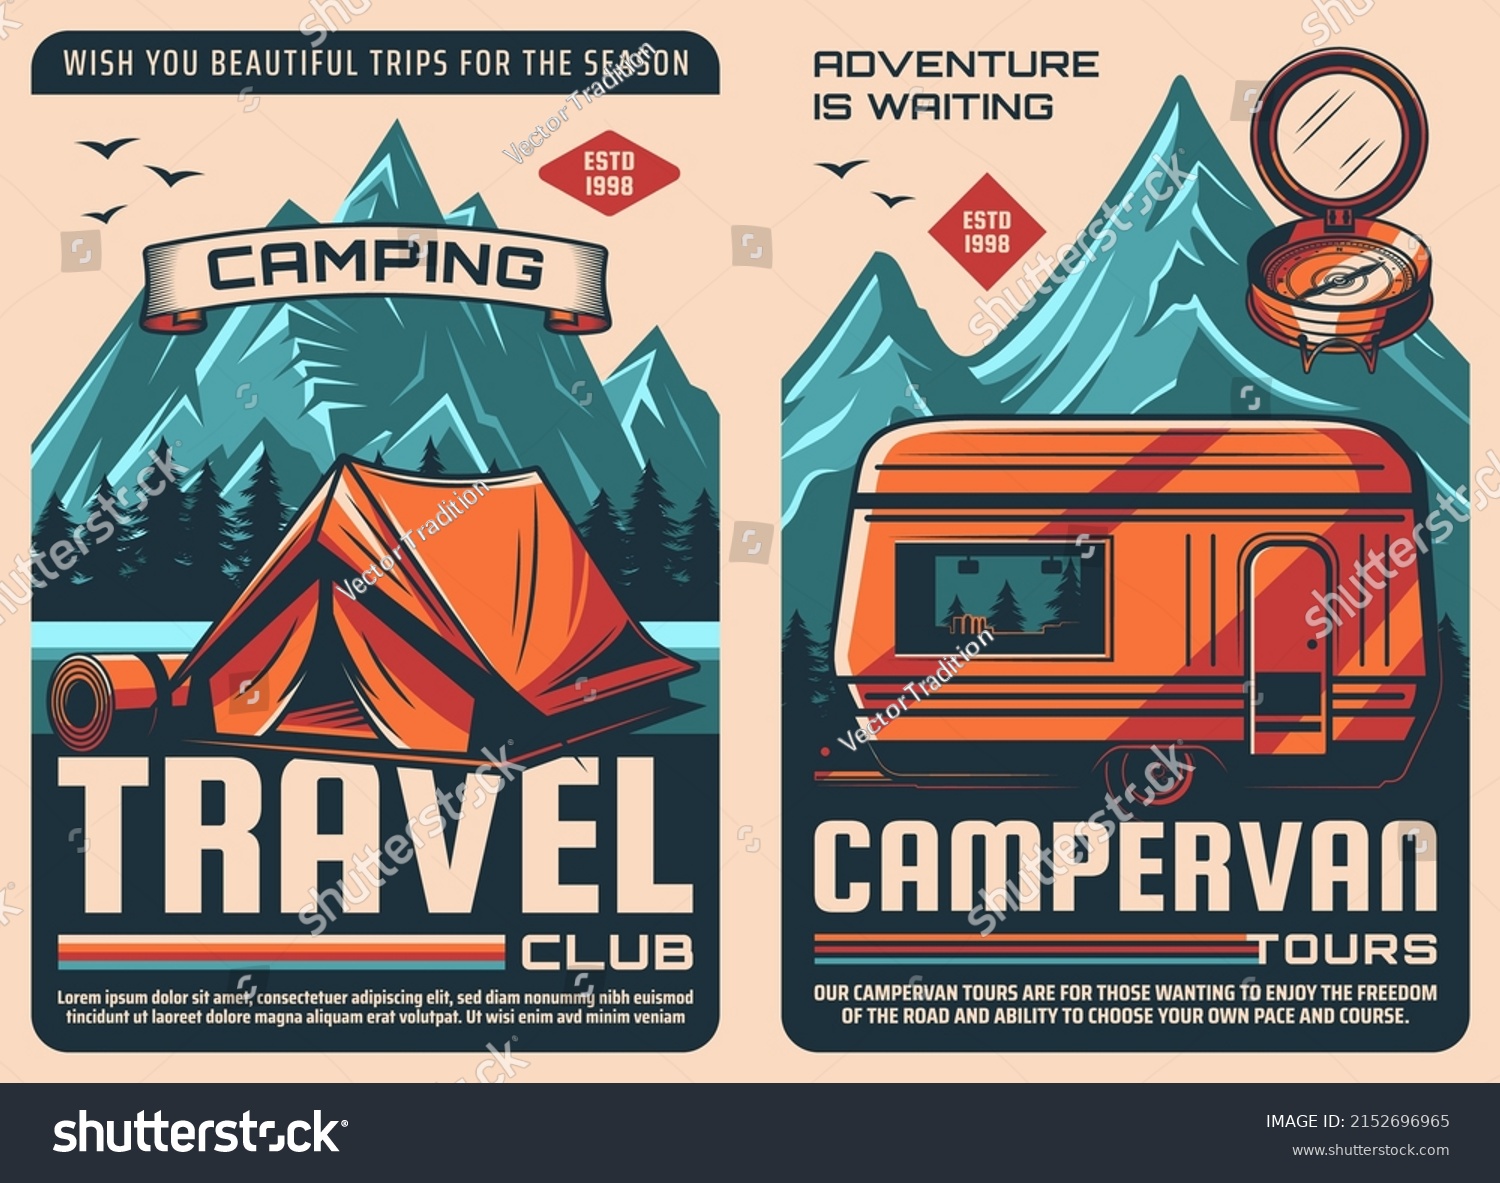 SVG of Travel camping and van retro posters, outdoor tourism with camper trailer. Mountaineering or hiking travel club and adventure expedition to mountains or forest lake camp with caravan van or RV truck svg